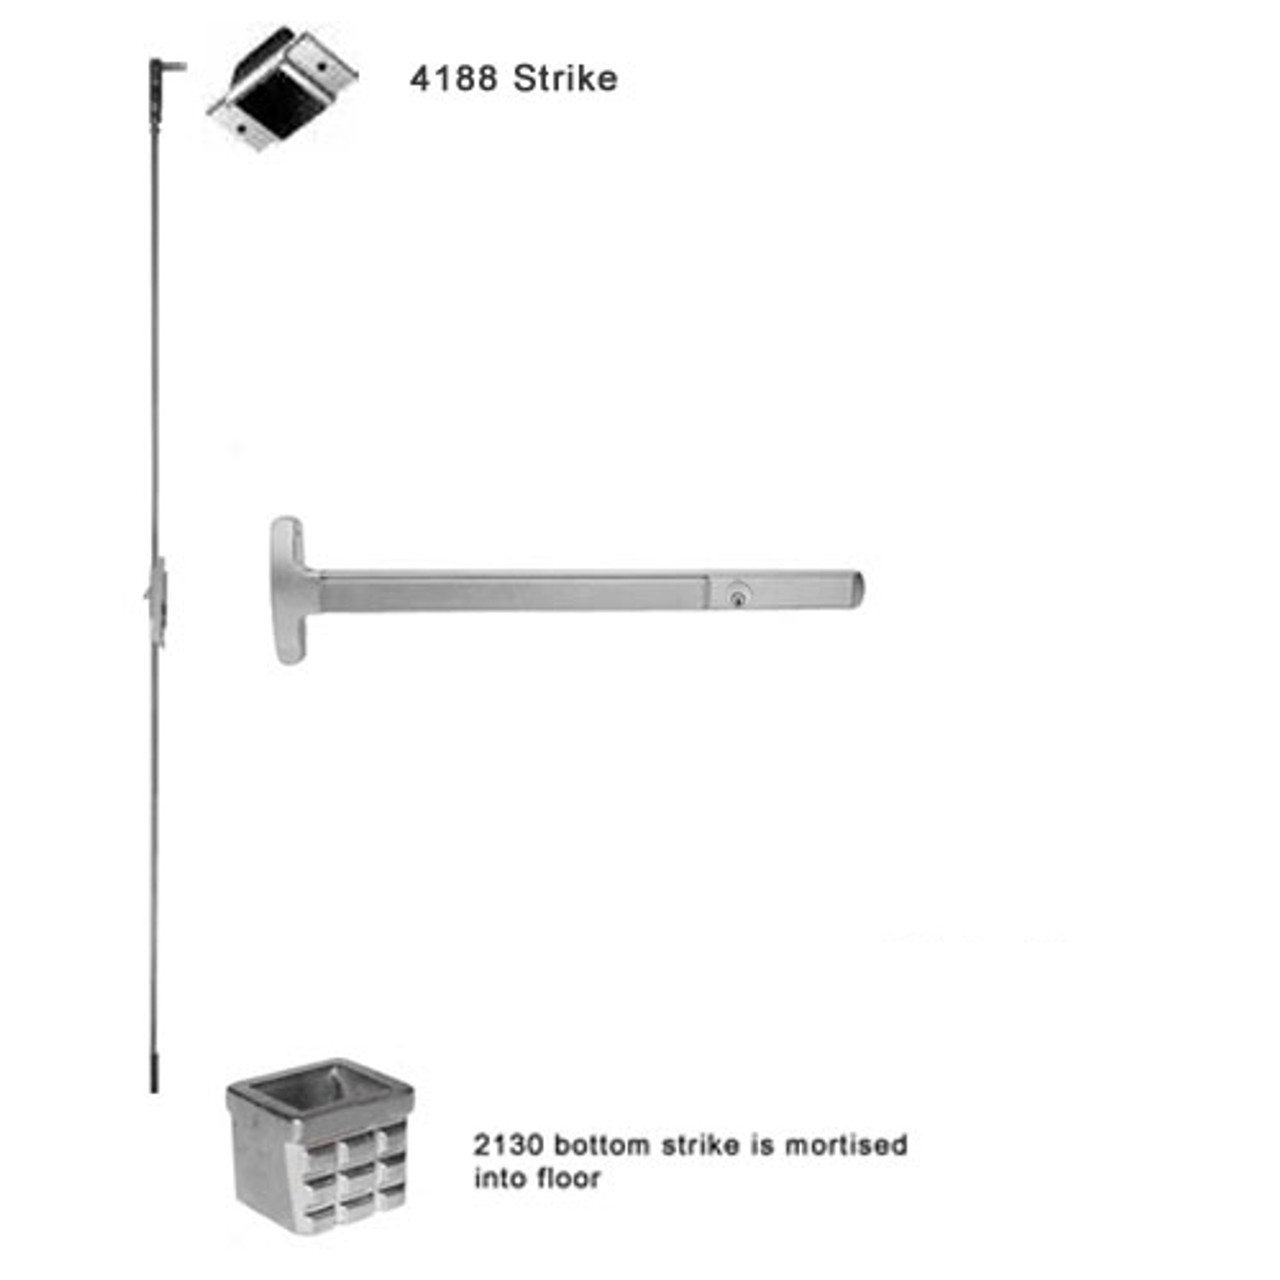 CD24-C-NL-US26-4-LHR Falcon 24 Series Concealed Vertical Rod Device with 718NL Delta Night Latch Trim in Polished Chrome